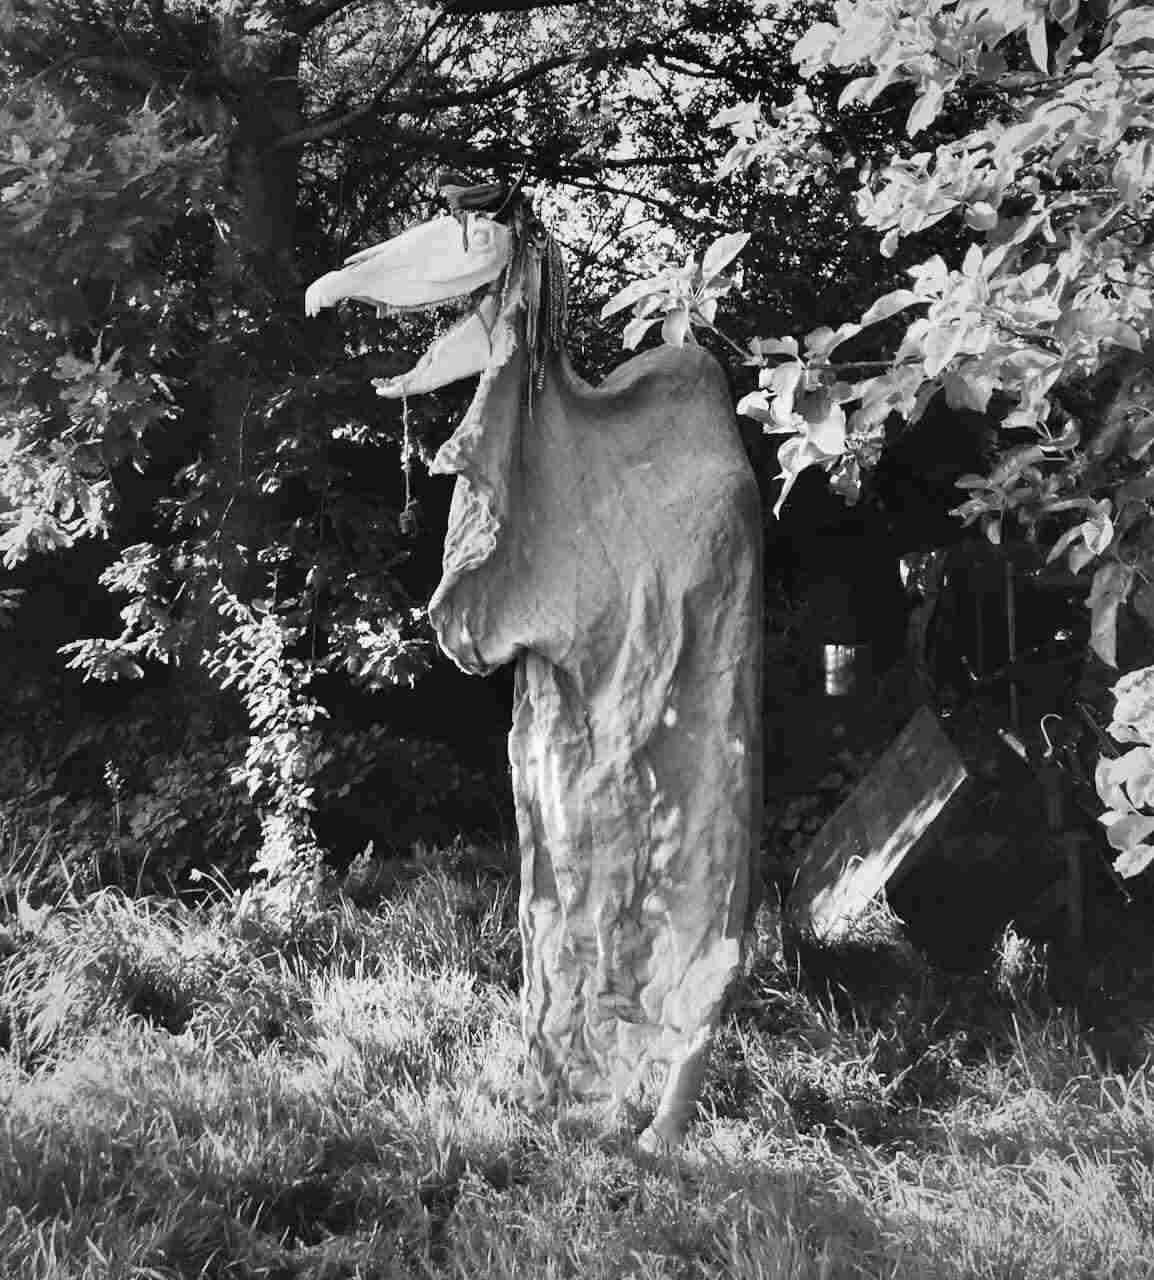 A photo of the website owner under a Mari Lwyd's frock.